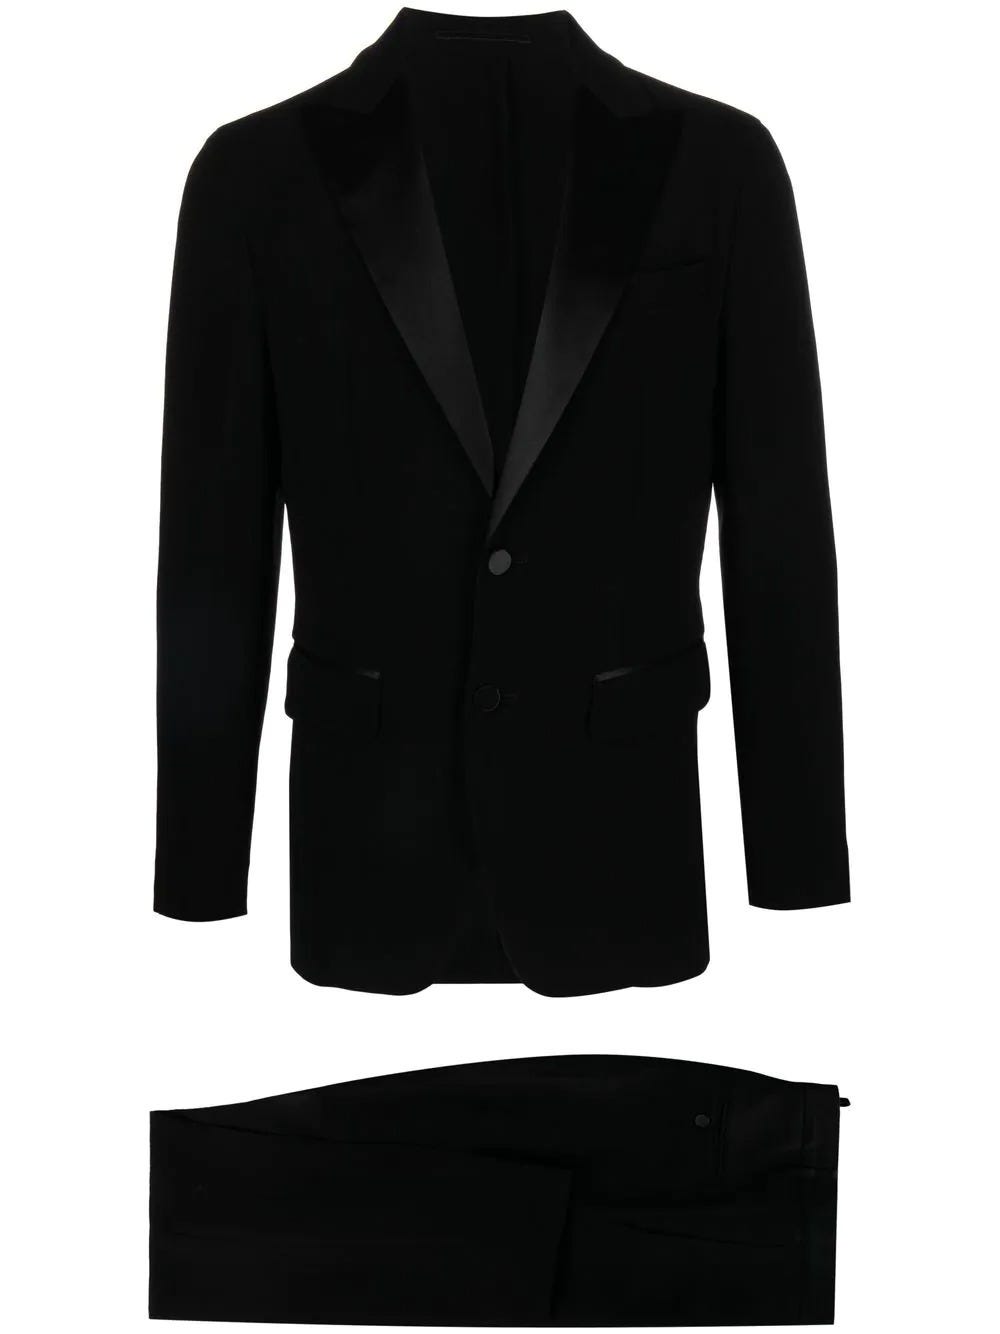 DSQUARED2 TWO-PIECE BLACK TAILORED SUIT